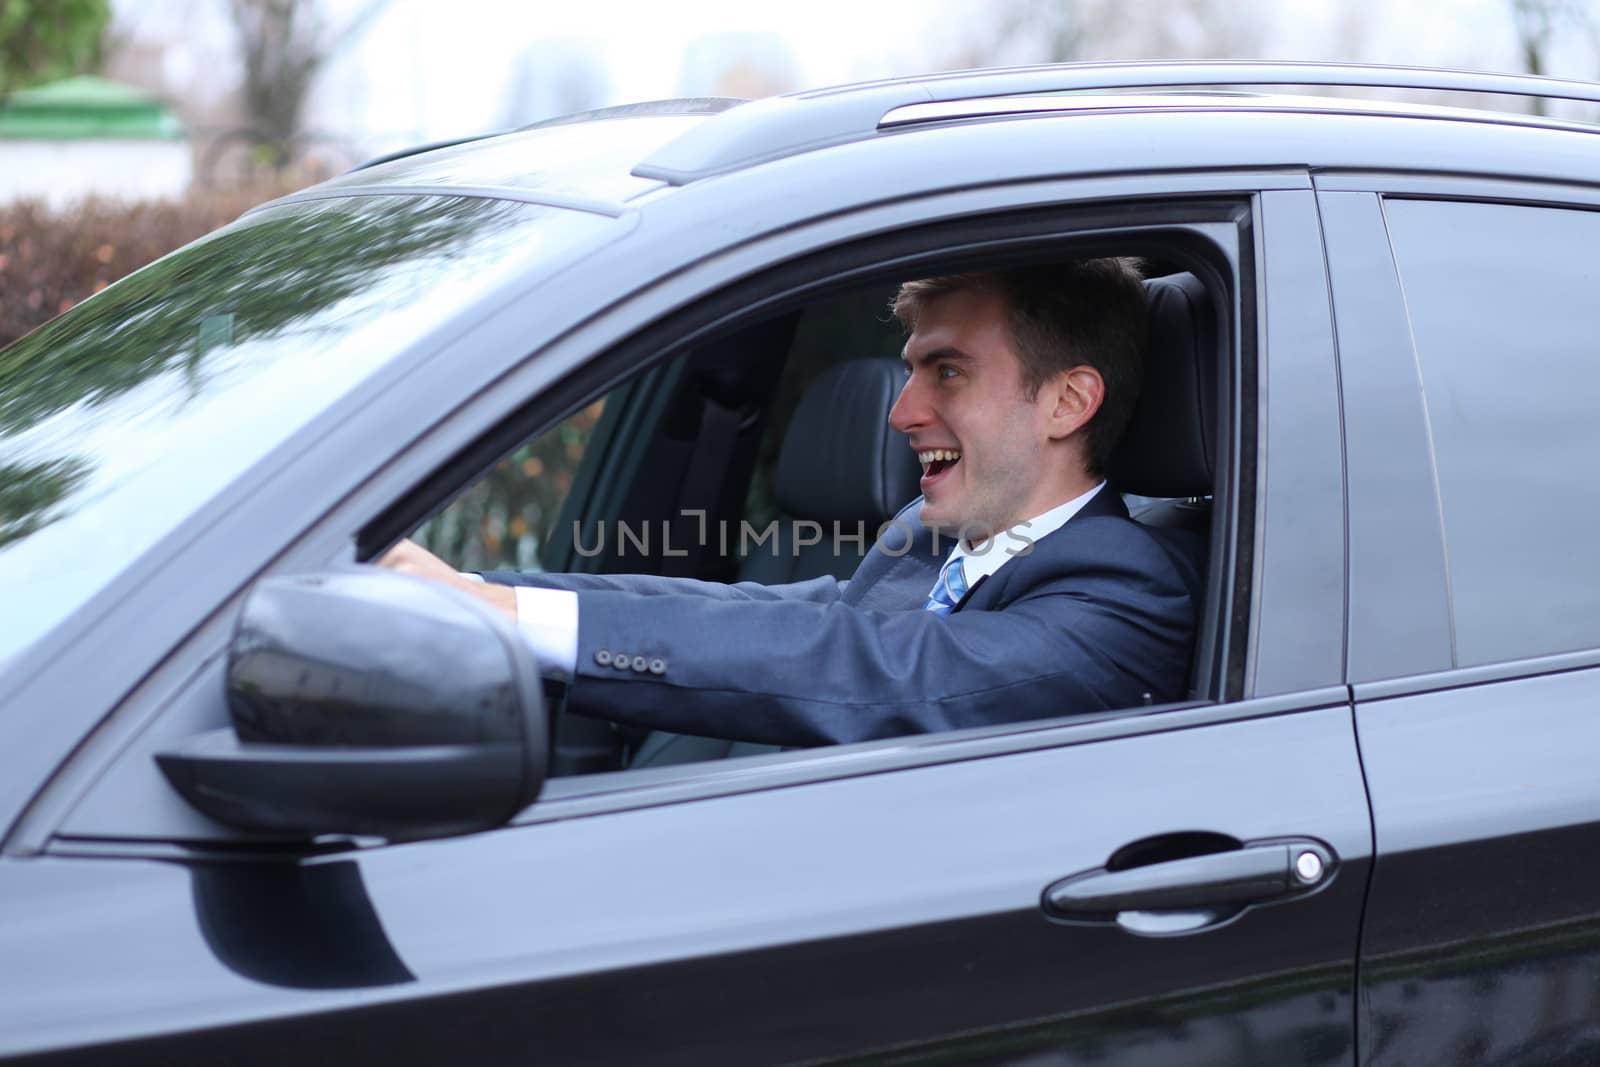 young attractive man young man in the car by andersonrise